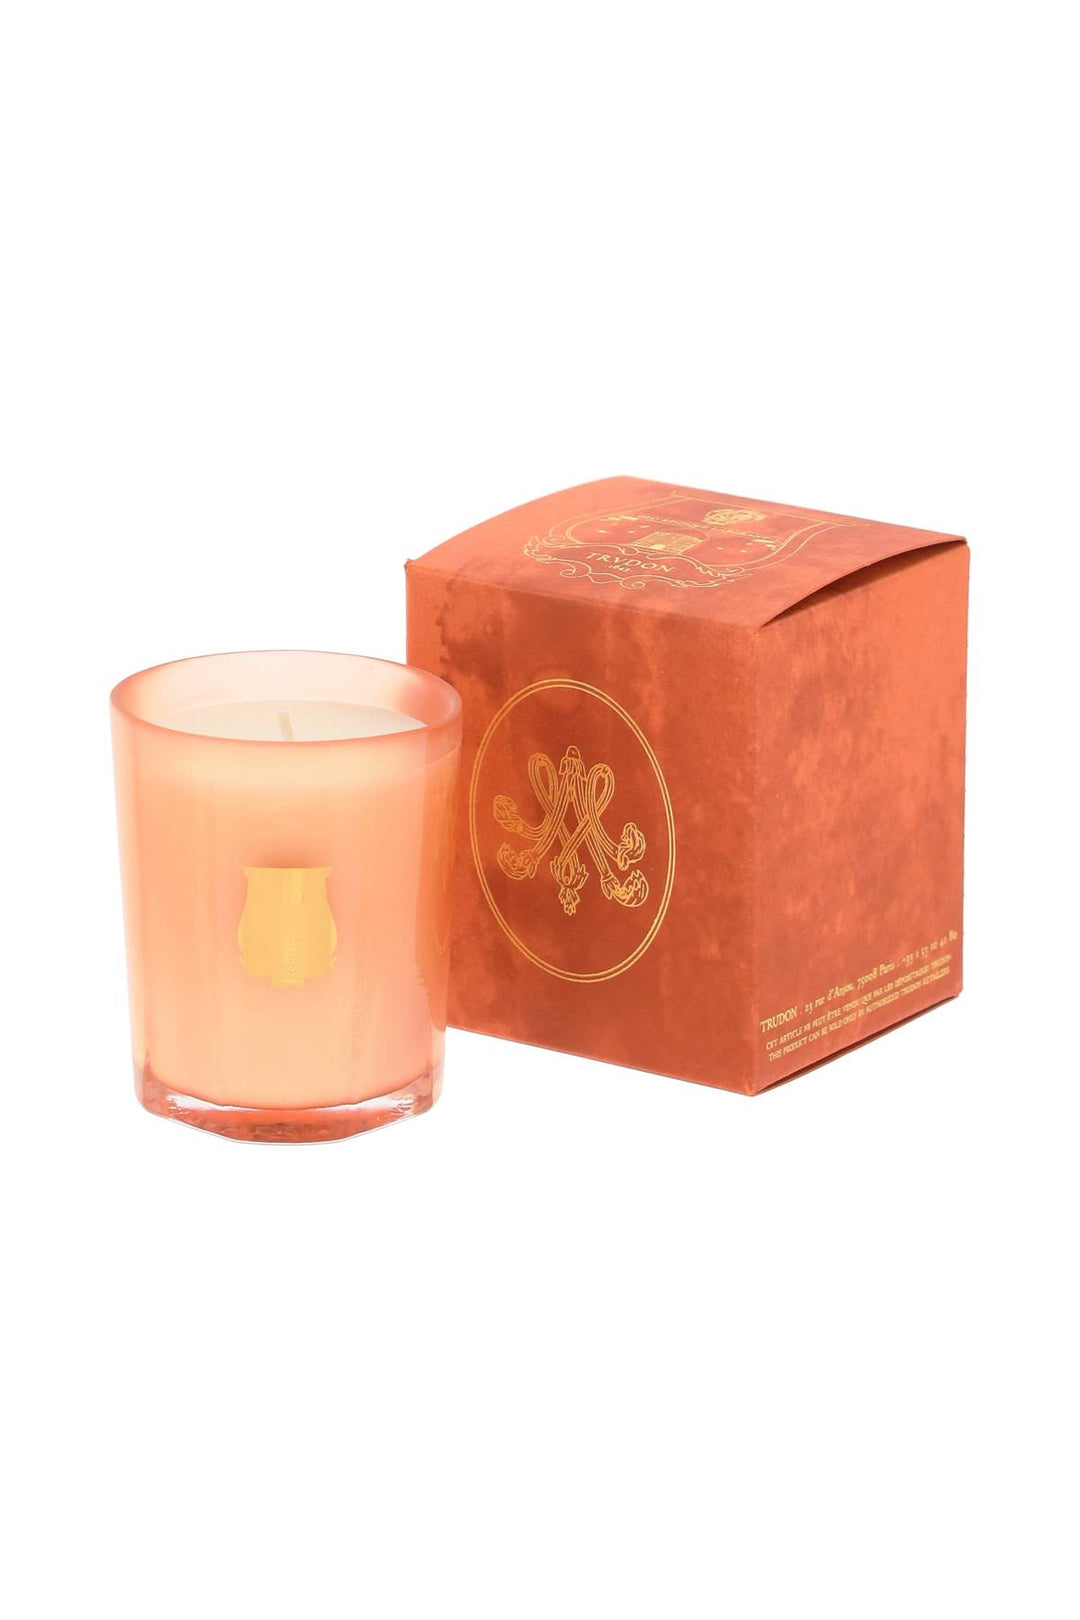 Cire trvdon 'tuileries' scented candle 70 g-2